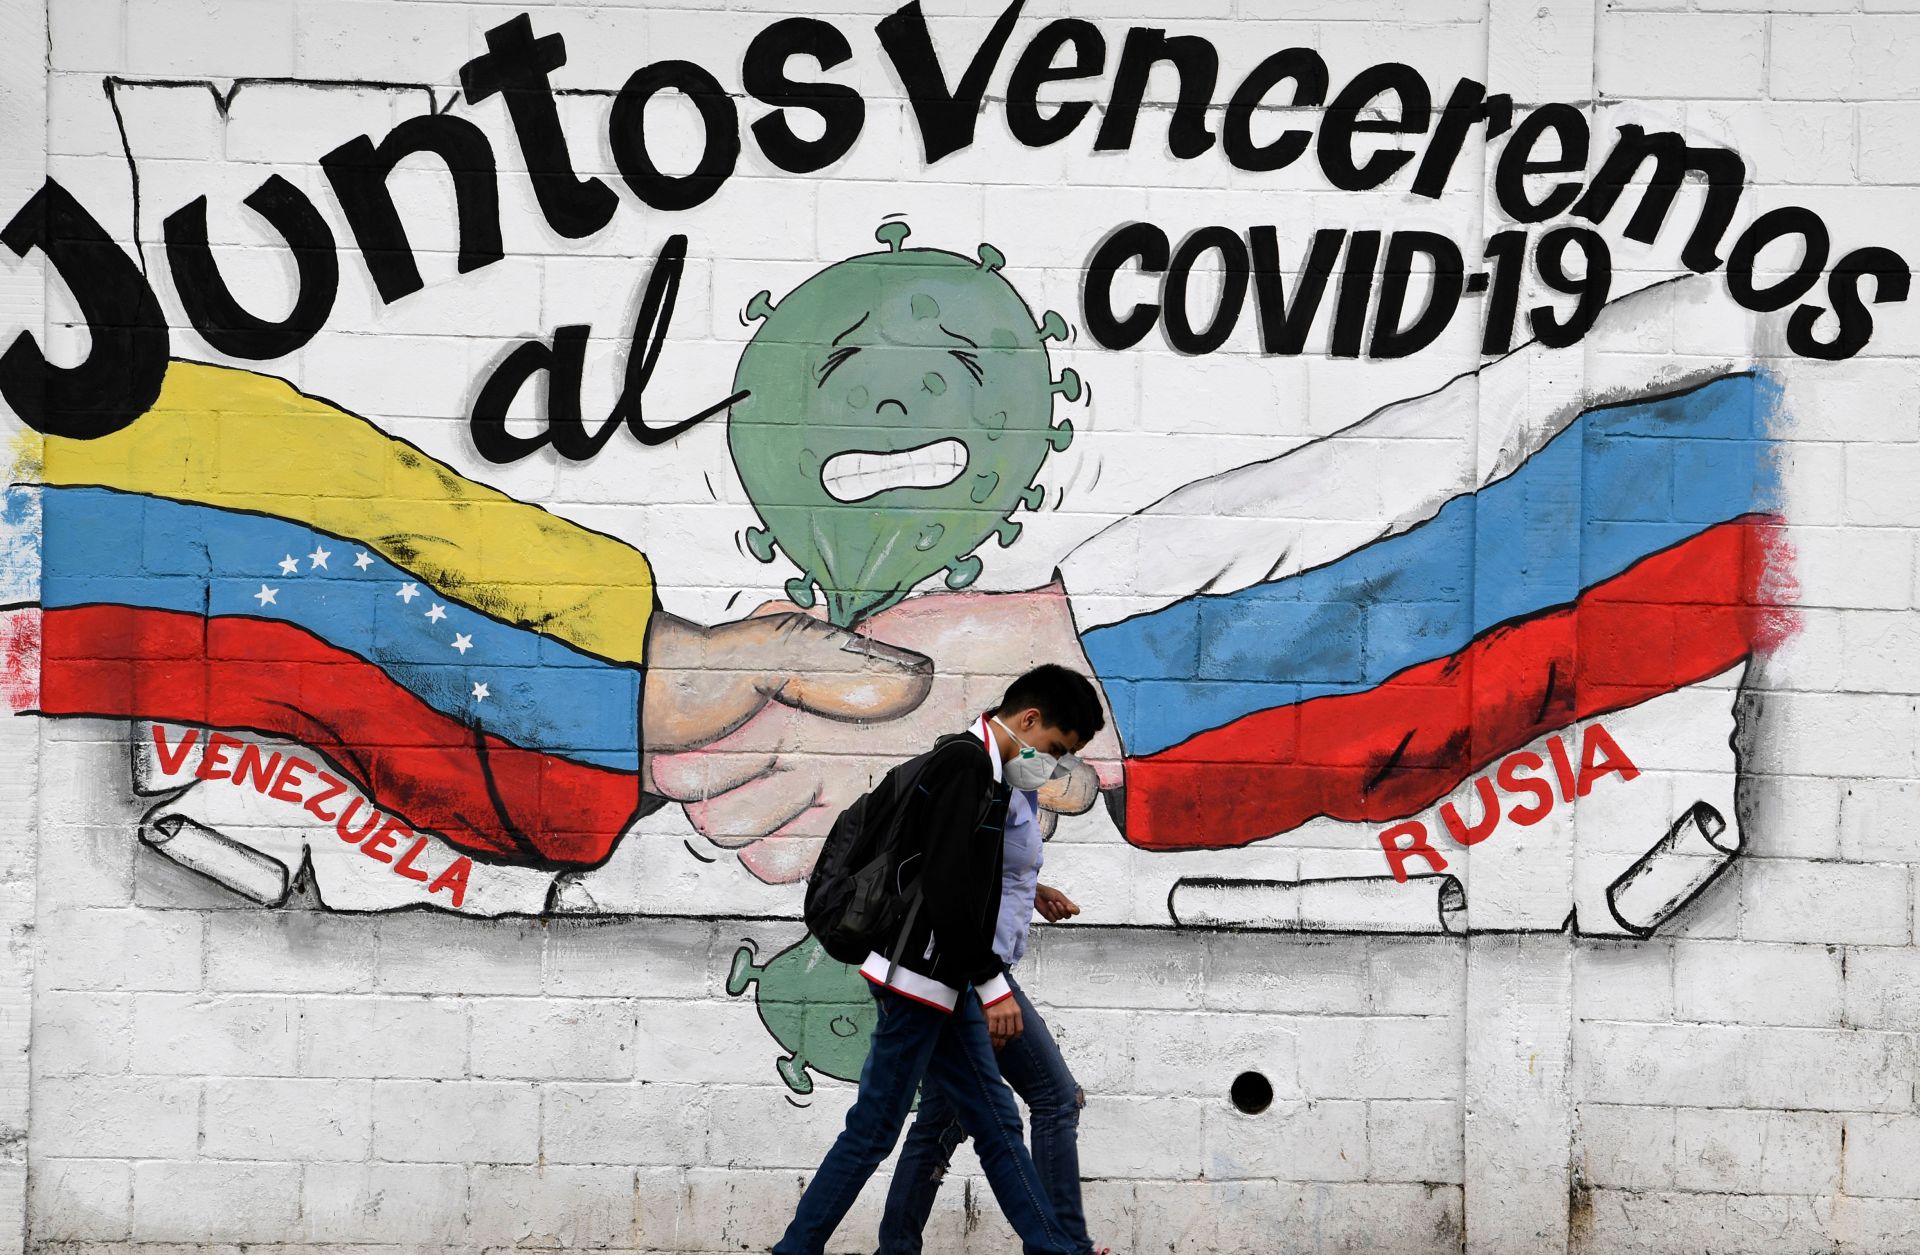 People walk past a mural of the Venezuelan and Russian flags that reads "Together we will defeat COVID-19" in Caracas, Venezuela, on March 4, 2021.